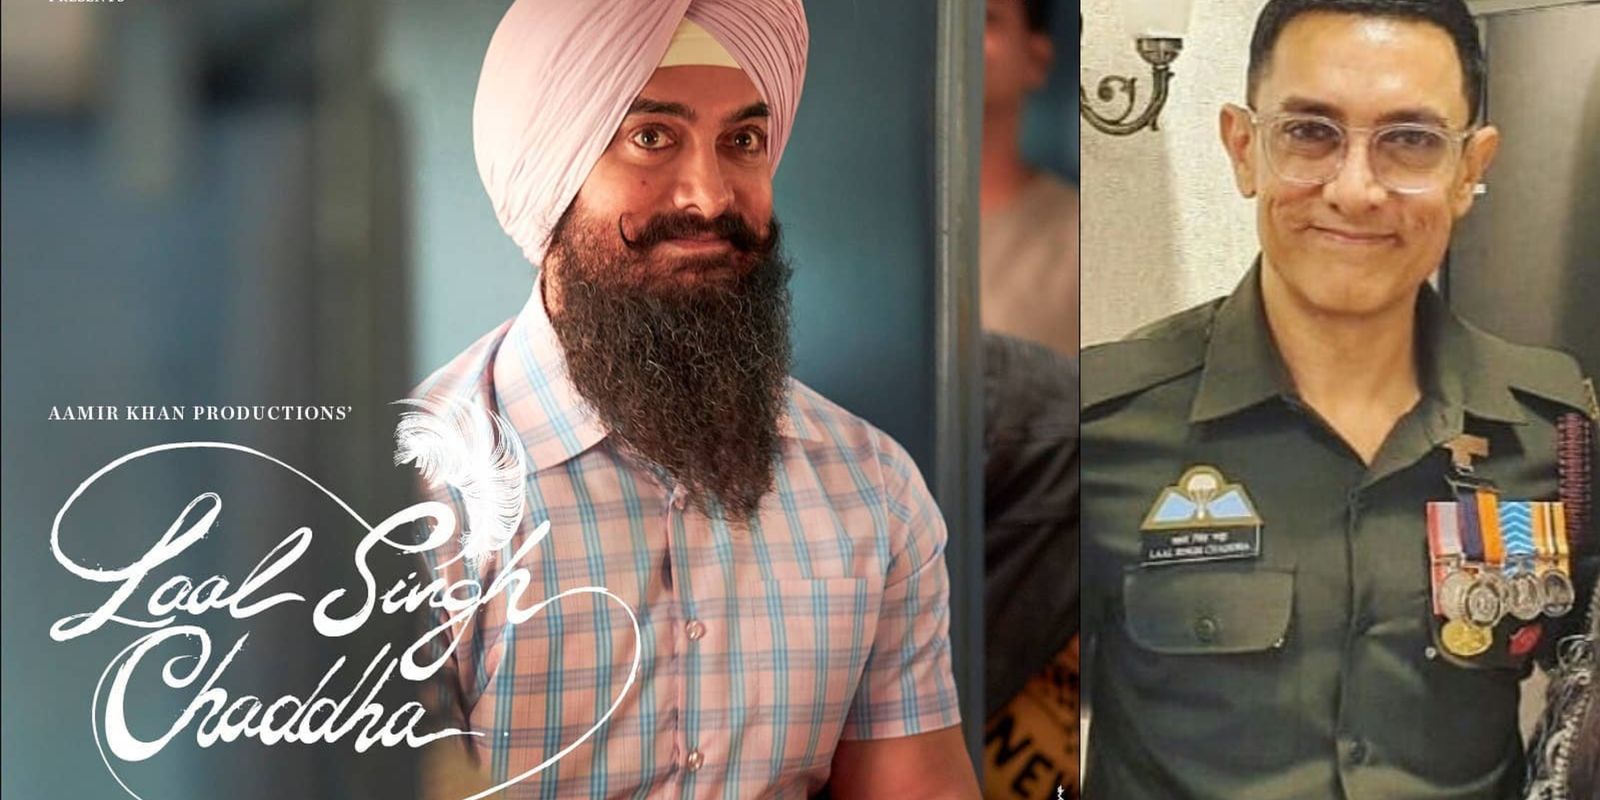 Laal Singh Chaddha: Aamir Khan Sports A Crisp Military Uniform In This New Look From The Film As He Poses With A Fan